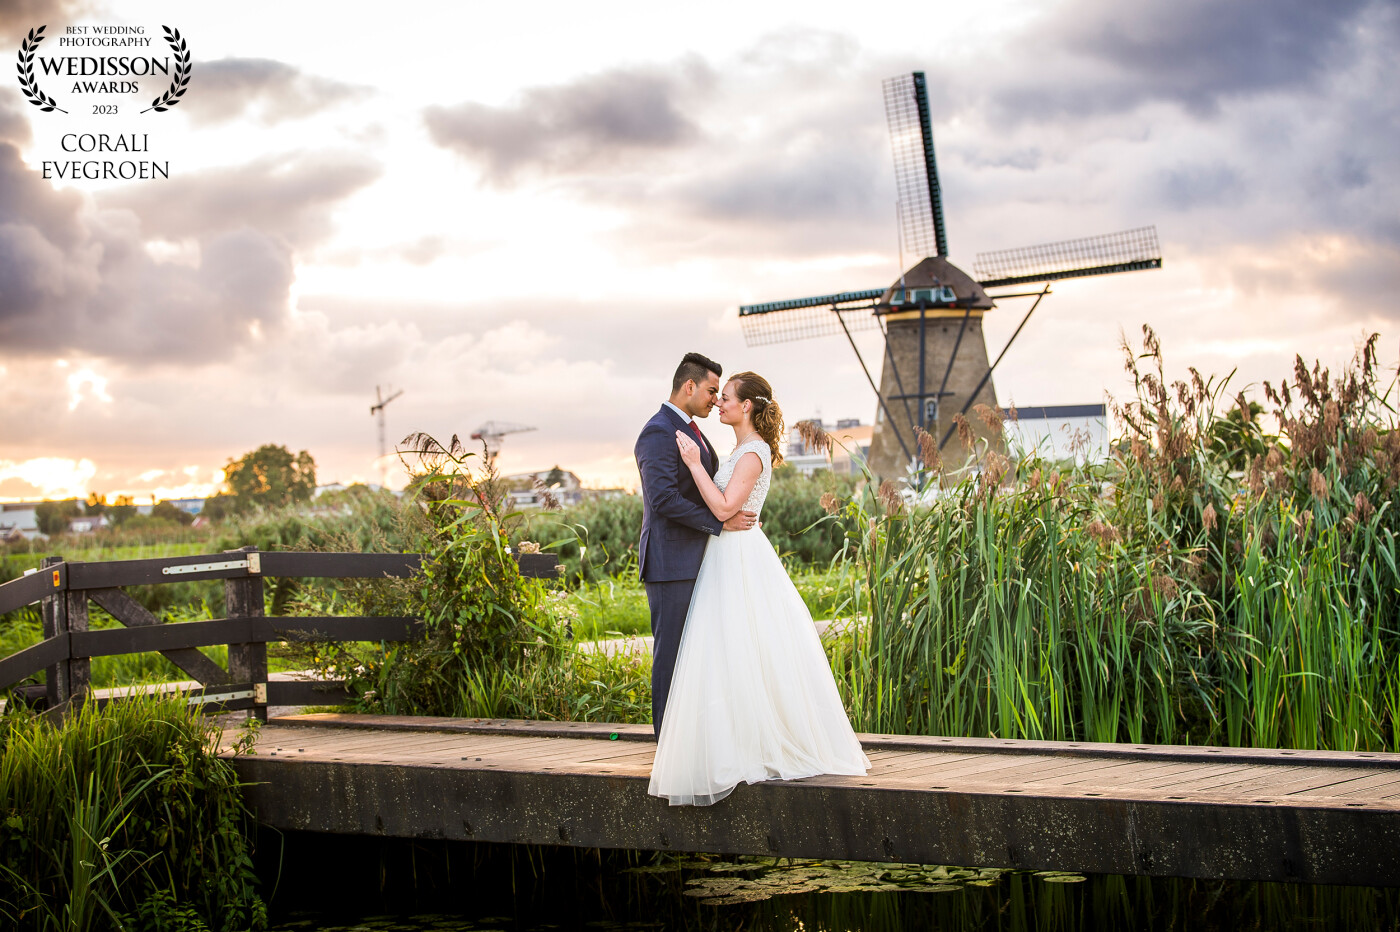 A beautiful sunset with a beautiful bridal couple at the famous windmills of Kinderdijk in the Netherlands